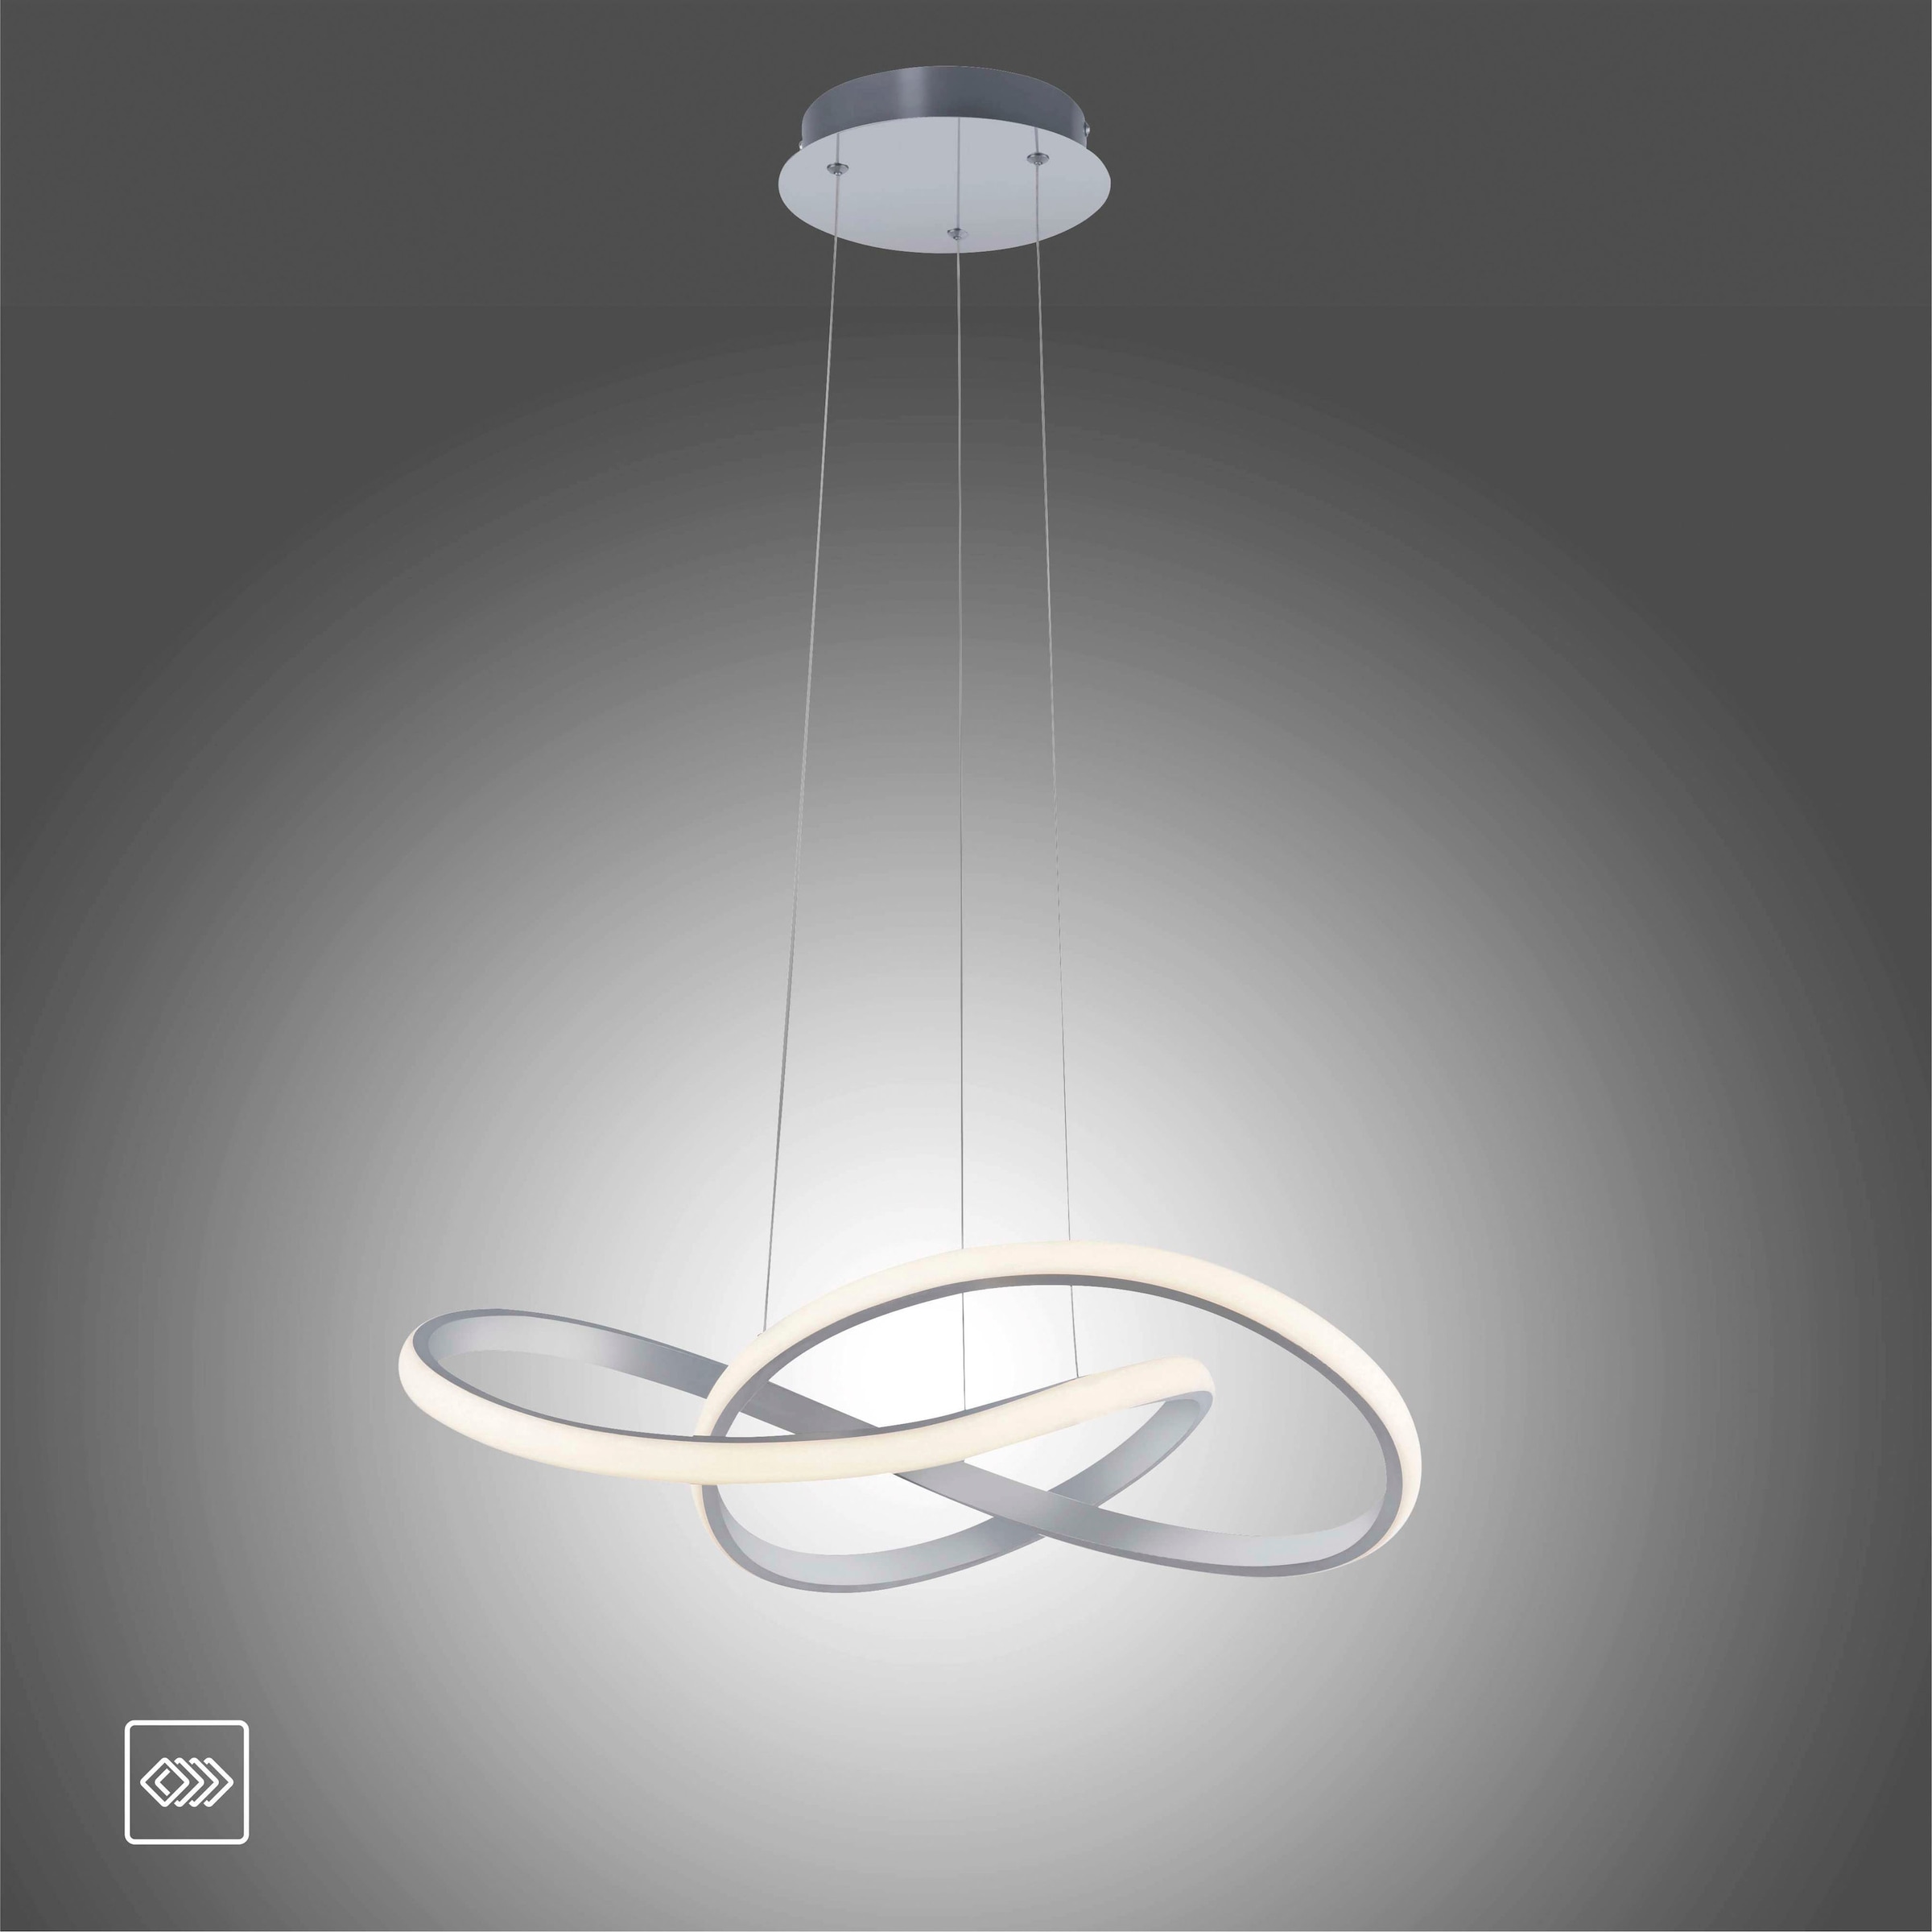 JUST LIGHT Pendelleuchte »MARIA«, 1 flammig-flammig, LED, dimmbar, Switchmo  bei OTTO